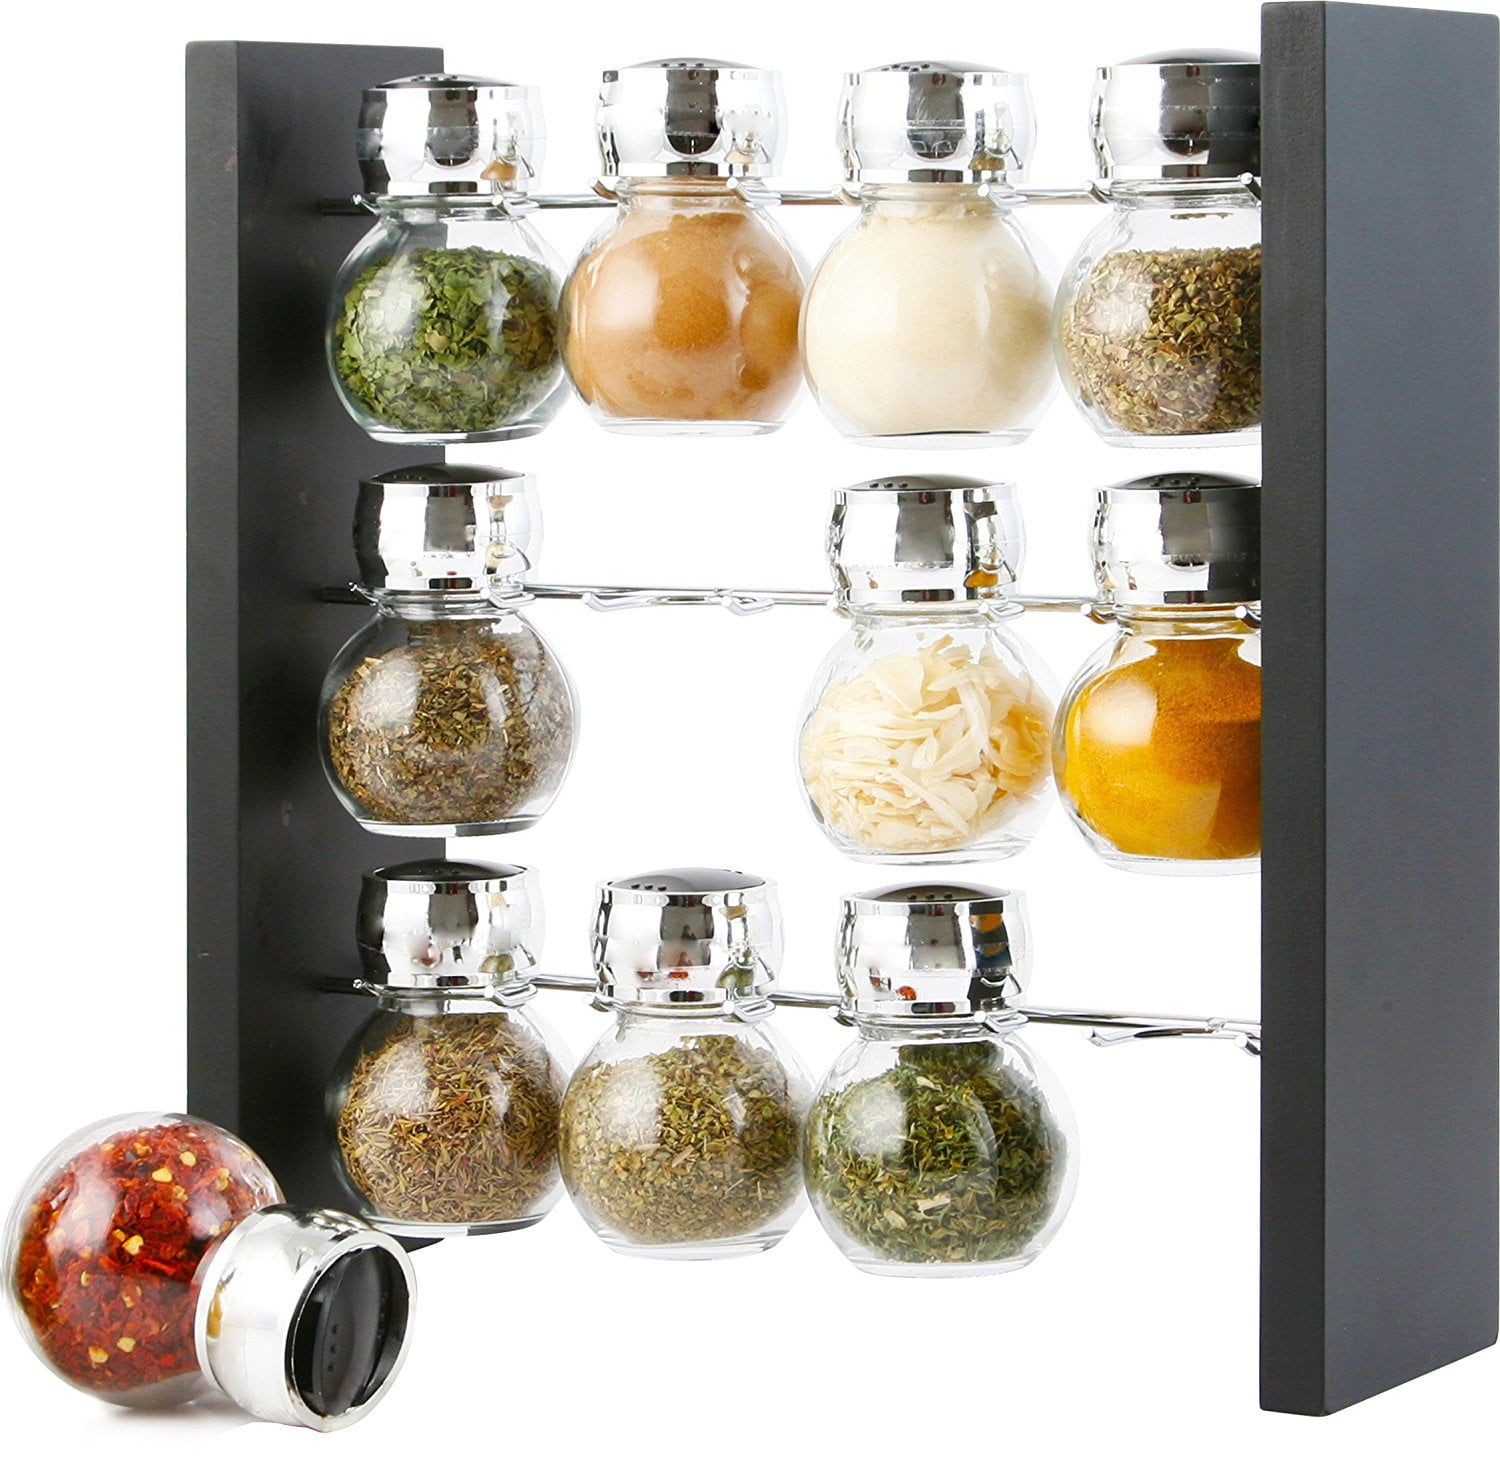 Spice Racks with 24 Glass Spice Jars & 2 Types of Printed Spice Labels by  Talented Kitchen. Complete Set: 2 Shelf Stainless Steel 3-Tier Racks, 24  Square Empty Glass Jars 4oz, Chalkboard